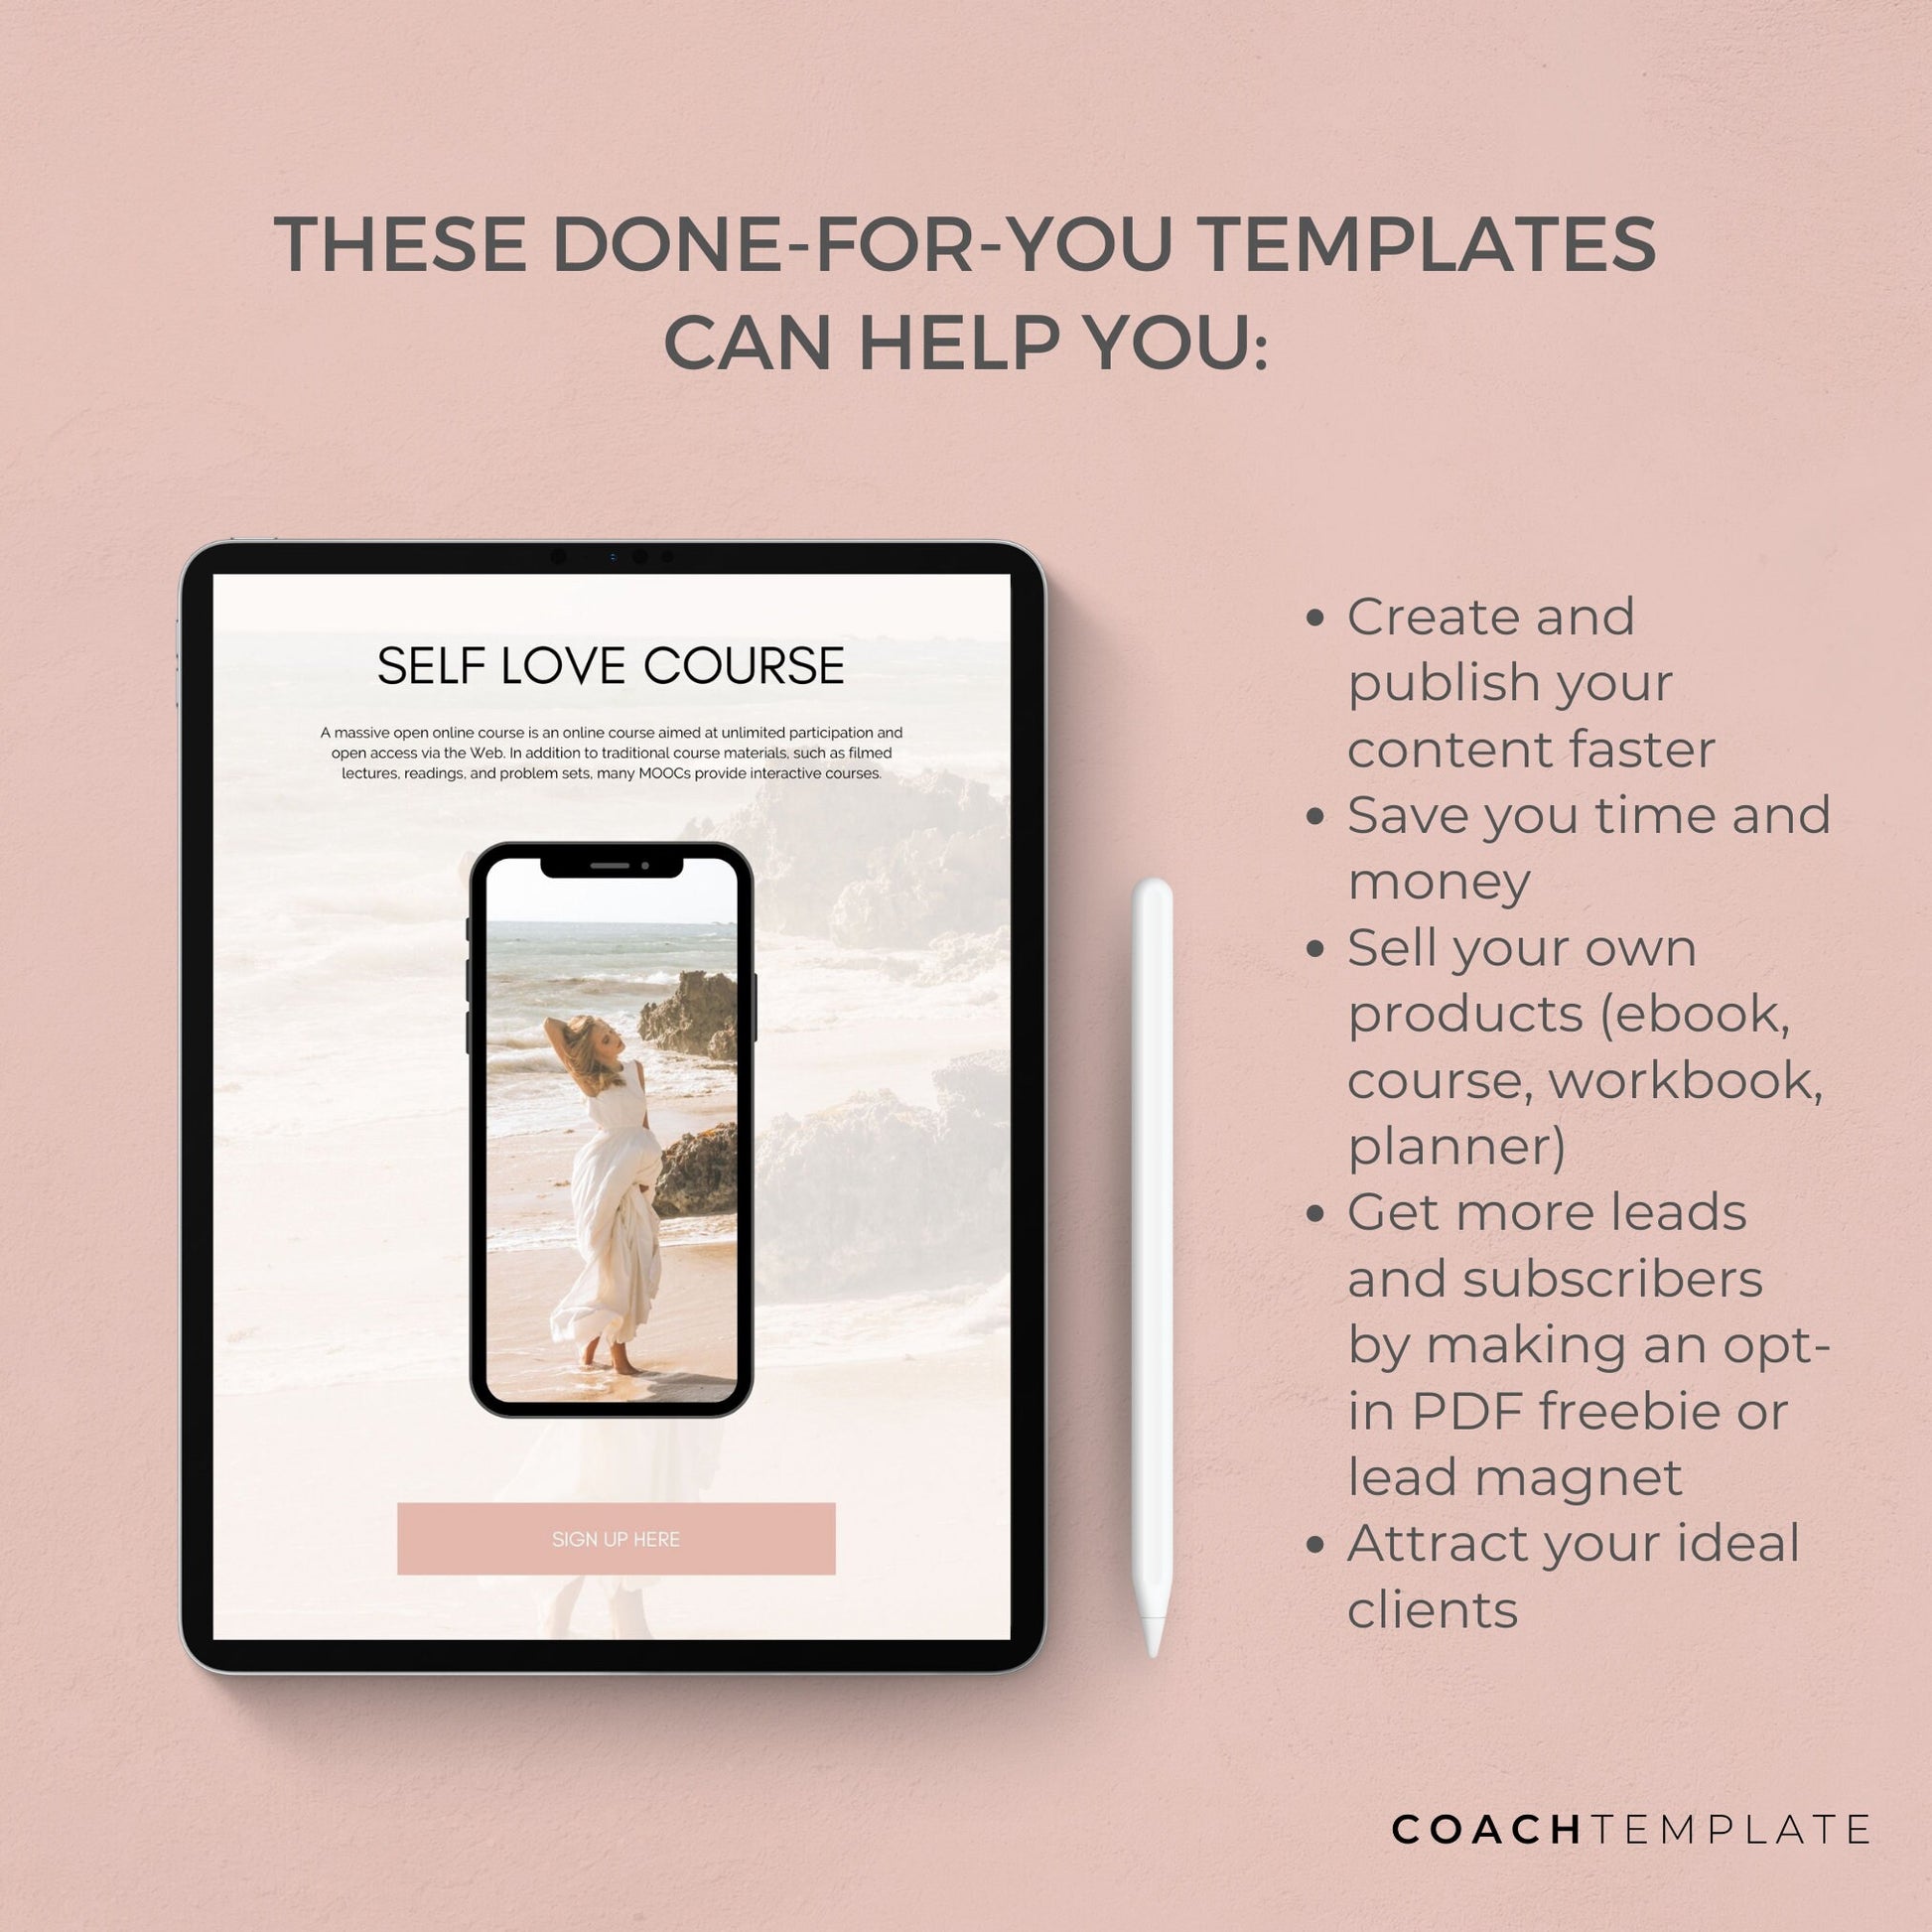 Self Love Challenge Planner Journal Editable Canva Template | wellness blogger Life Coaching business | Commercial Use Workbook Lead Magnet

Self Love Challenge Planner Journal Canva Template CT035 - CoachTemplate.etsy.com